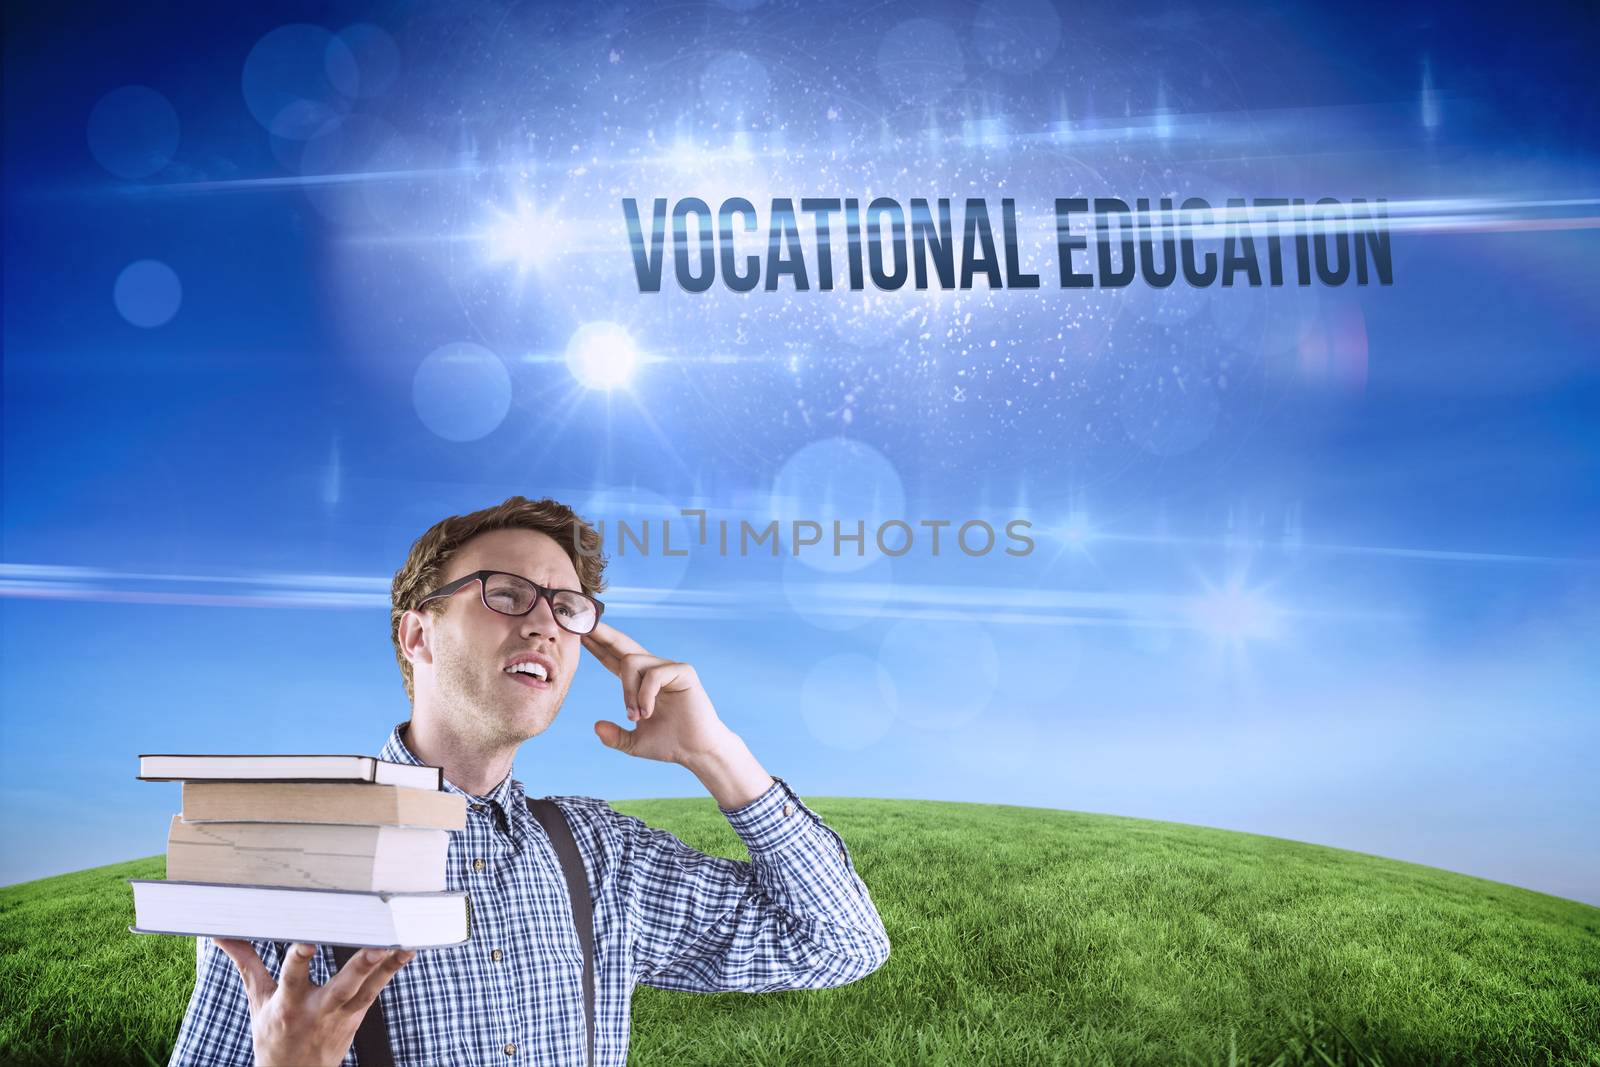 The word vocational education and geeky student holding a pile of books against green hill under blue sky